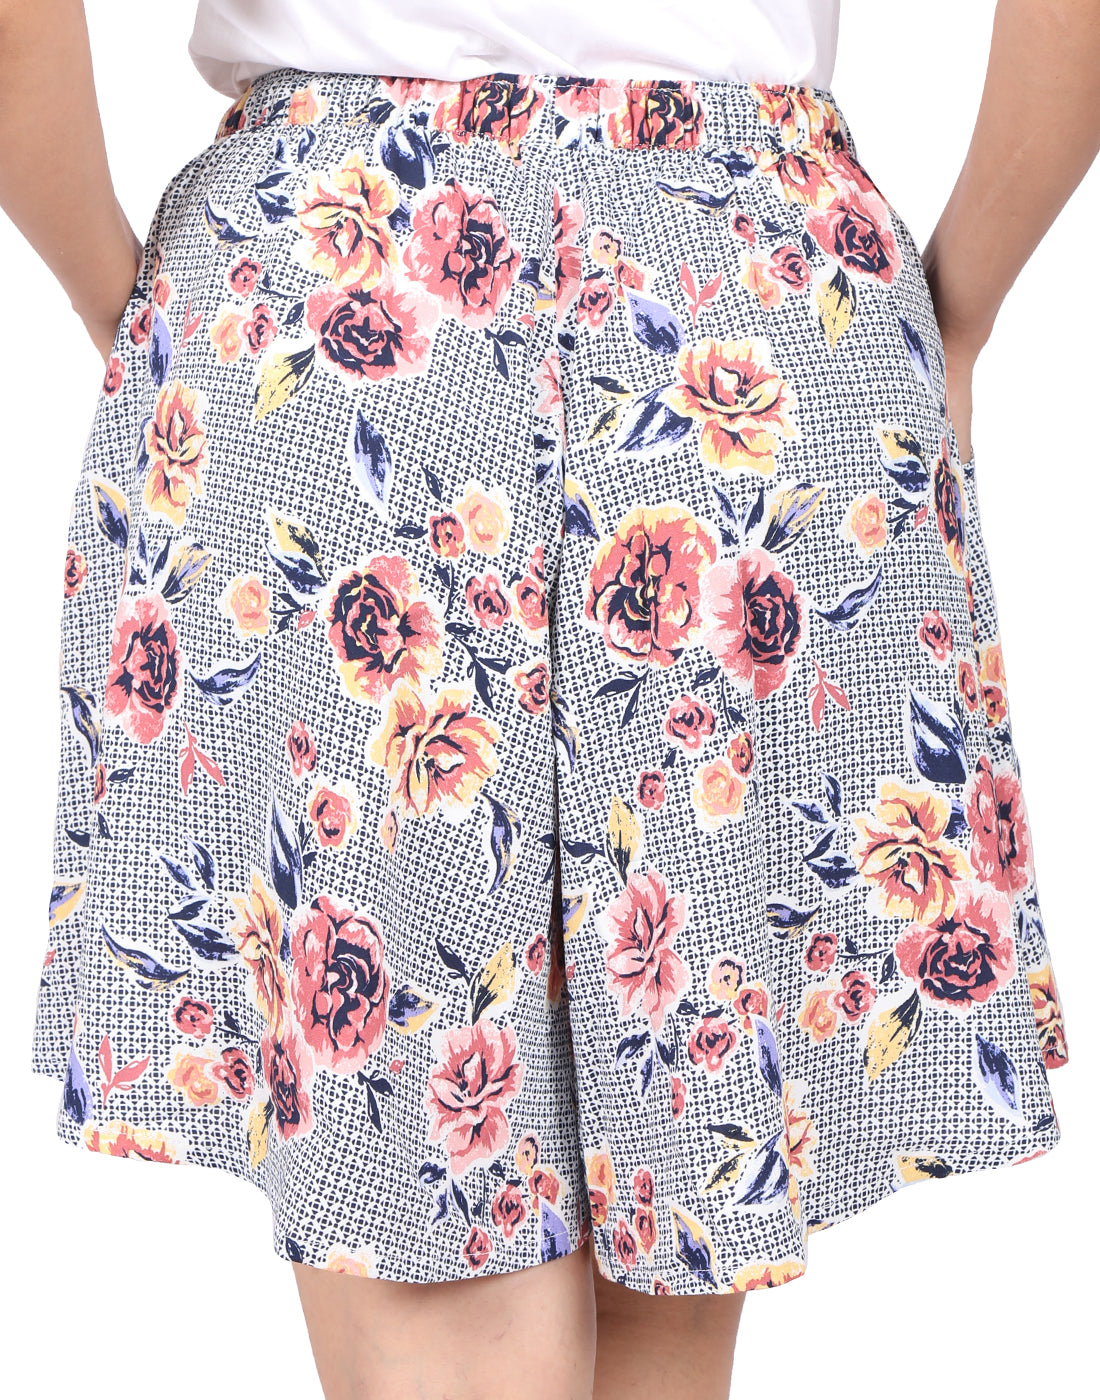 Culottes Shorts for Women-Picnic Floral